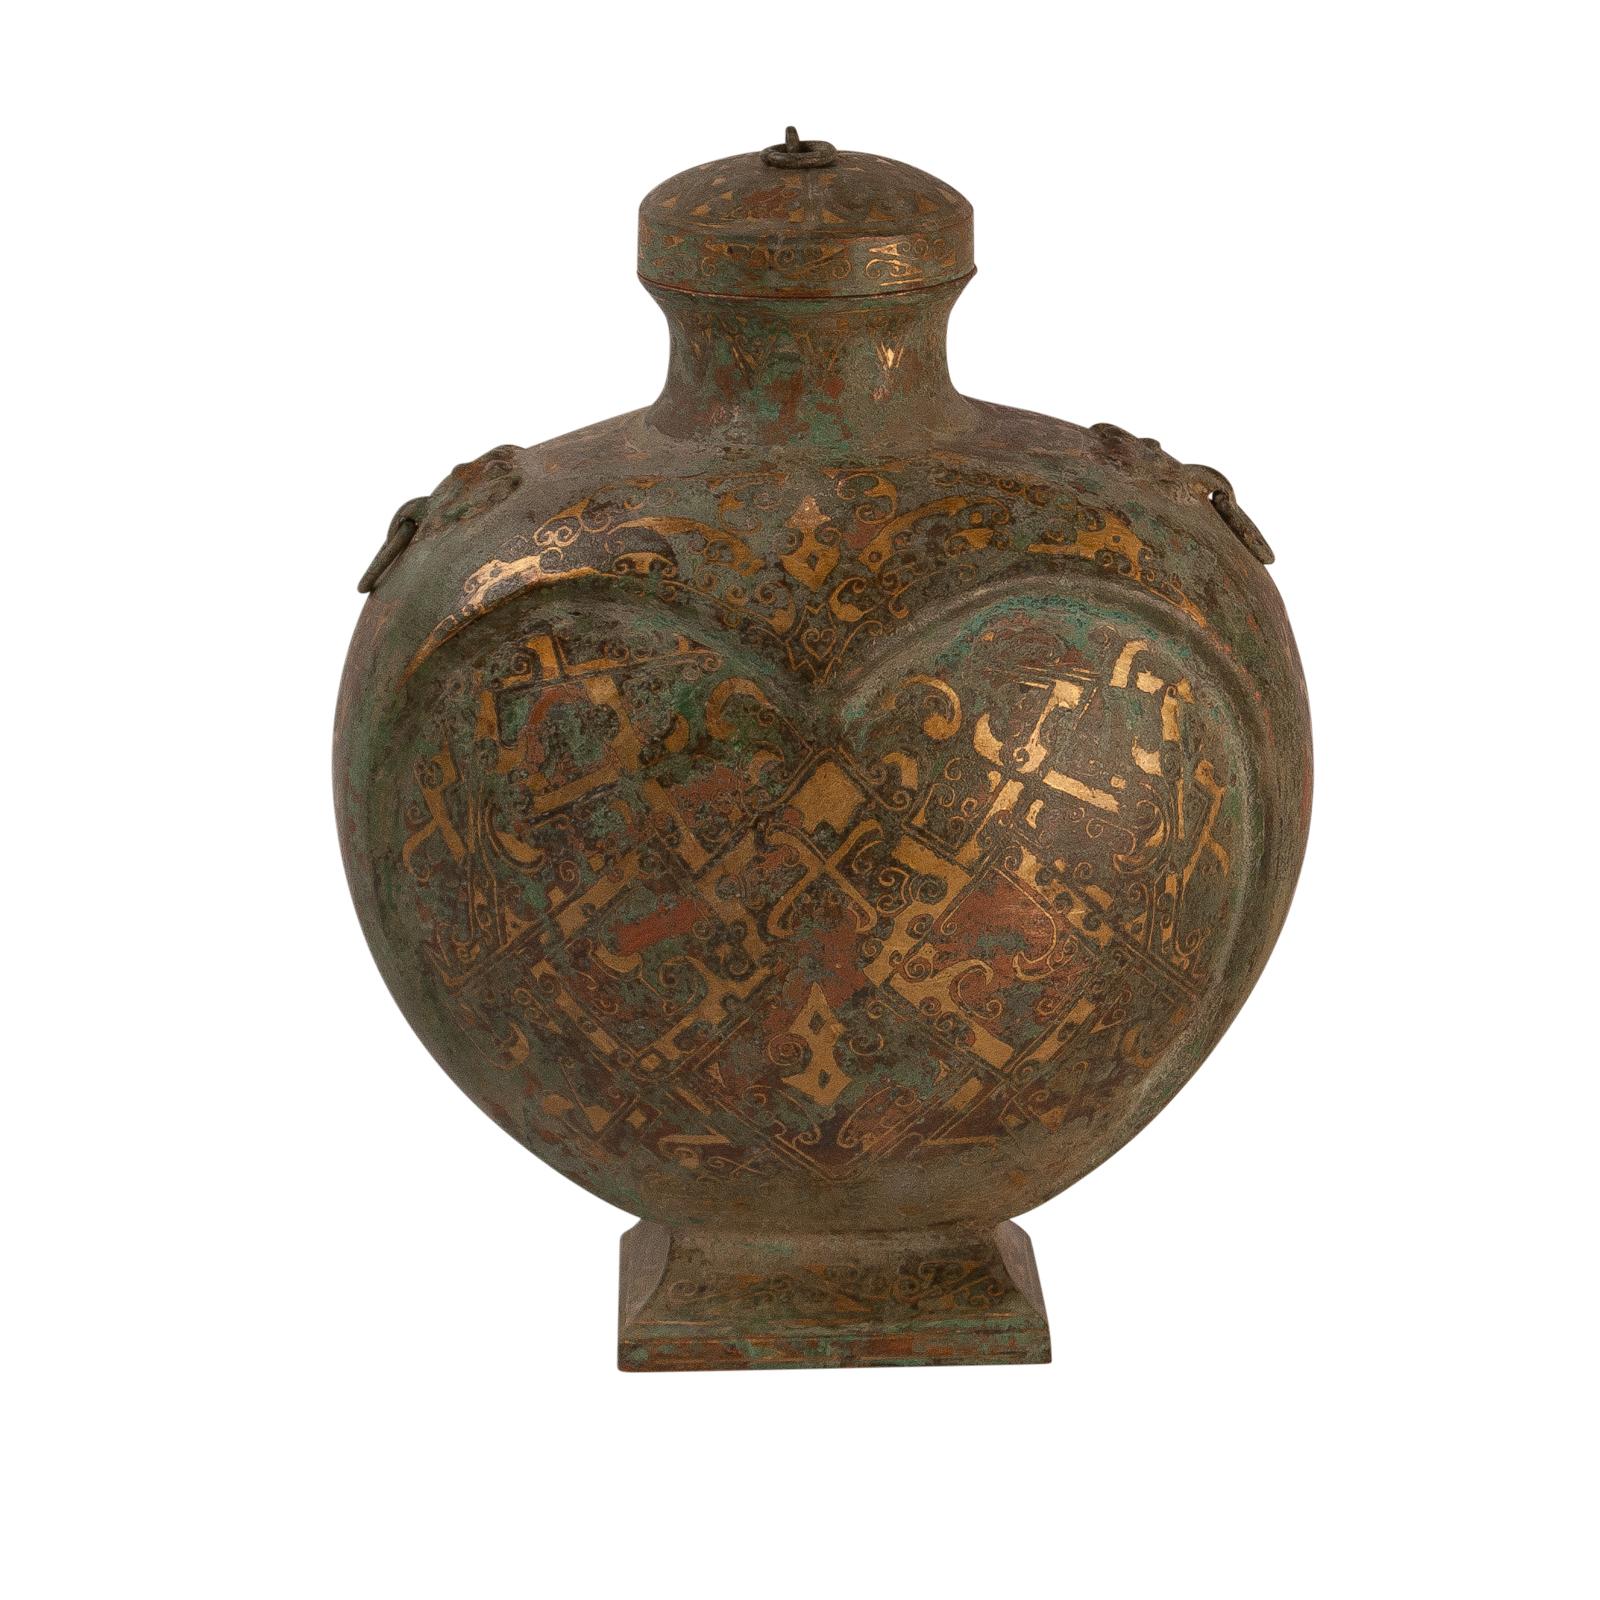 An Archaic Shang Dynasty style bronze flask inlaid with gold in a geometric pattern, China, Early to mid 20th century.  